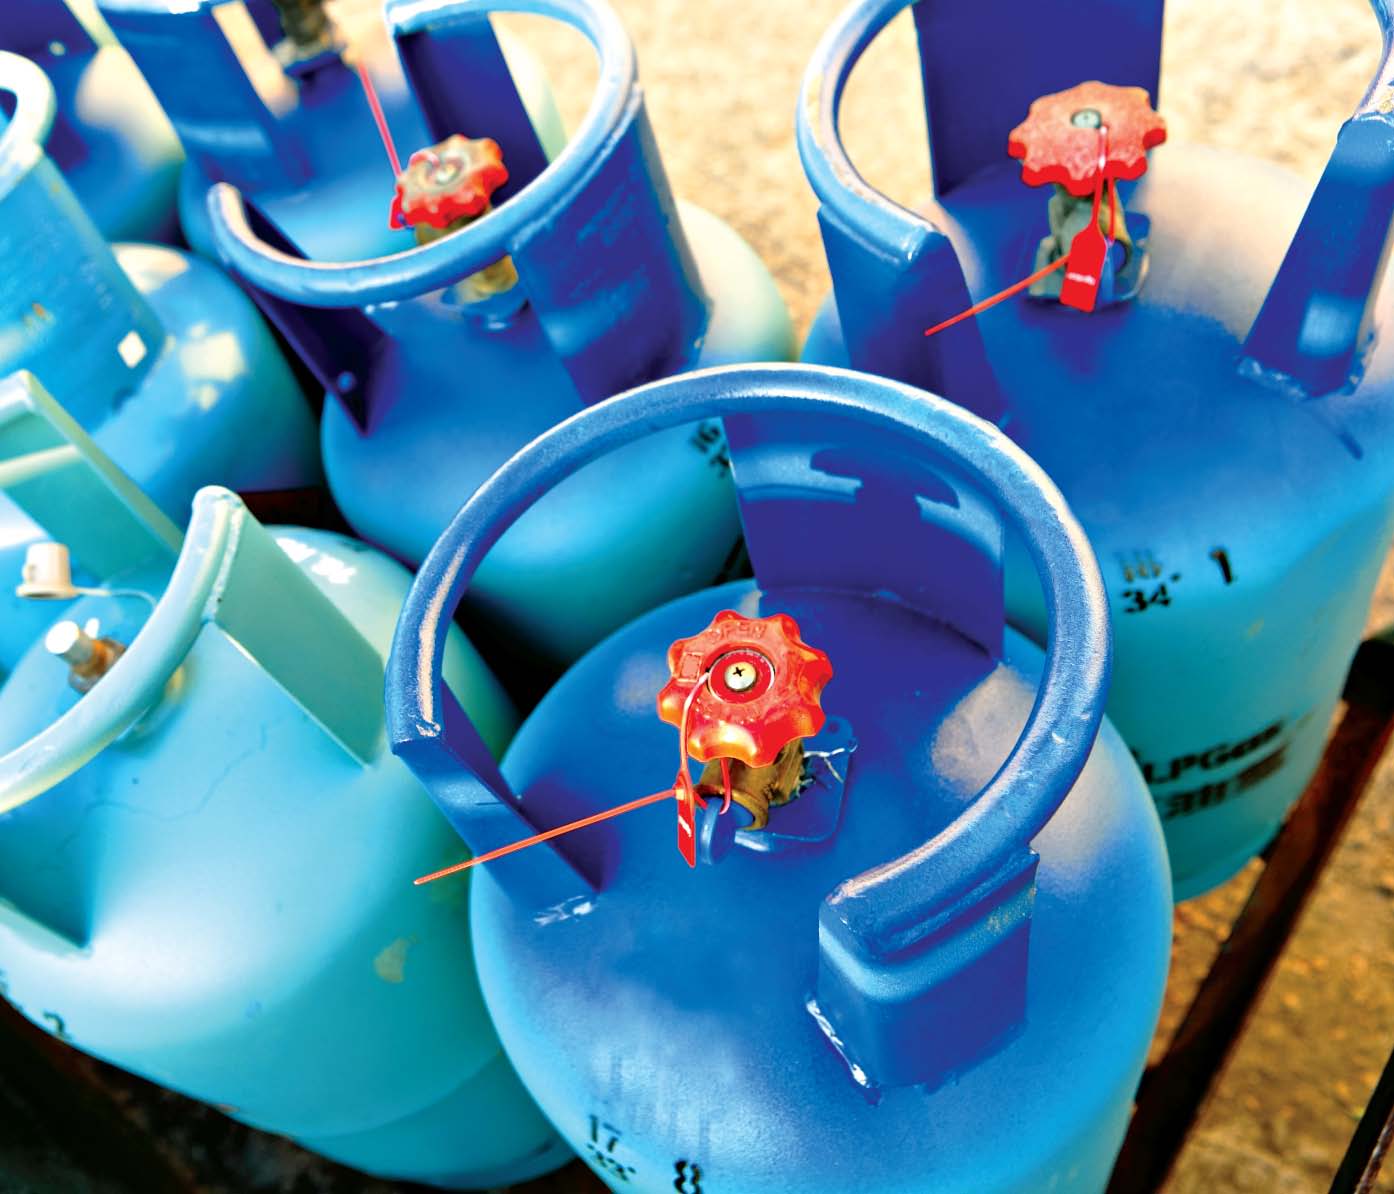 Govt allows LPG imports without inviting bids